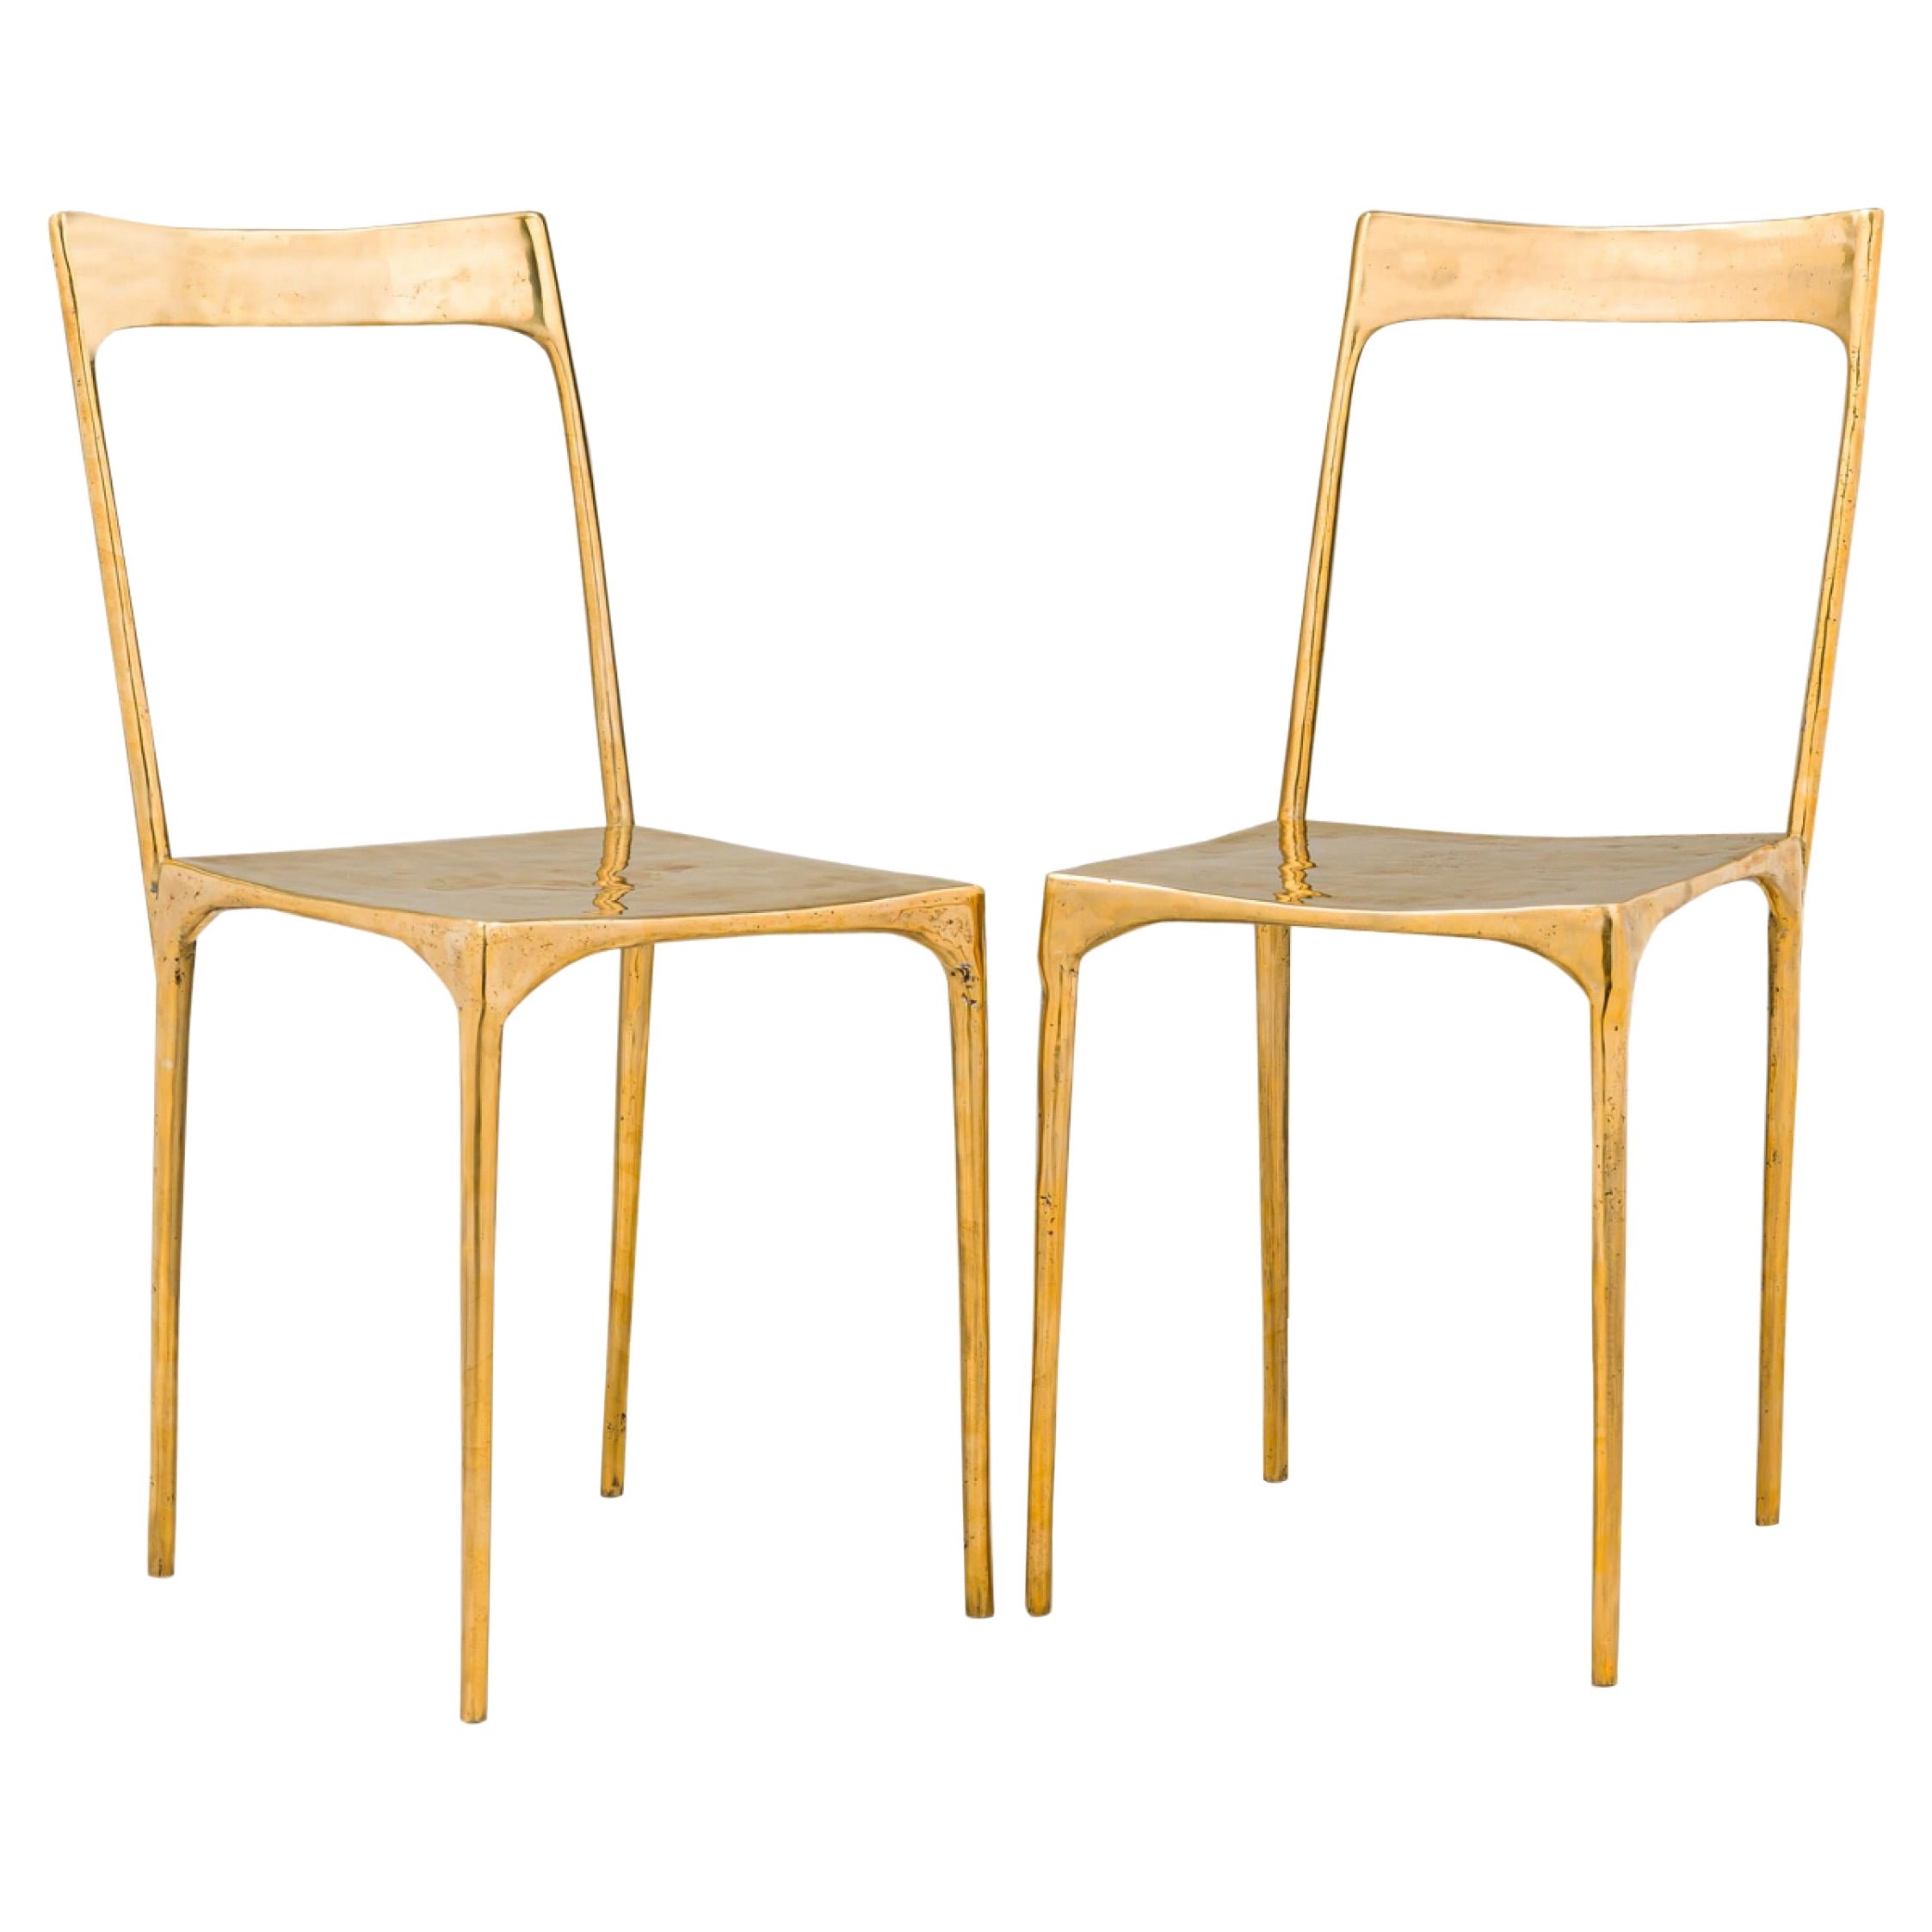 "Banquete" Contemporary Polished Bronze Side Chairs For Sale